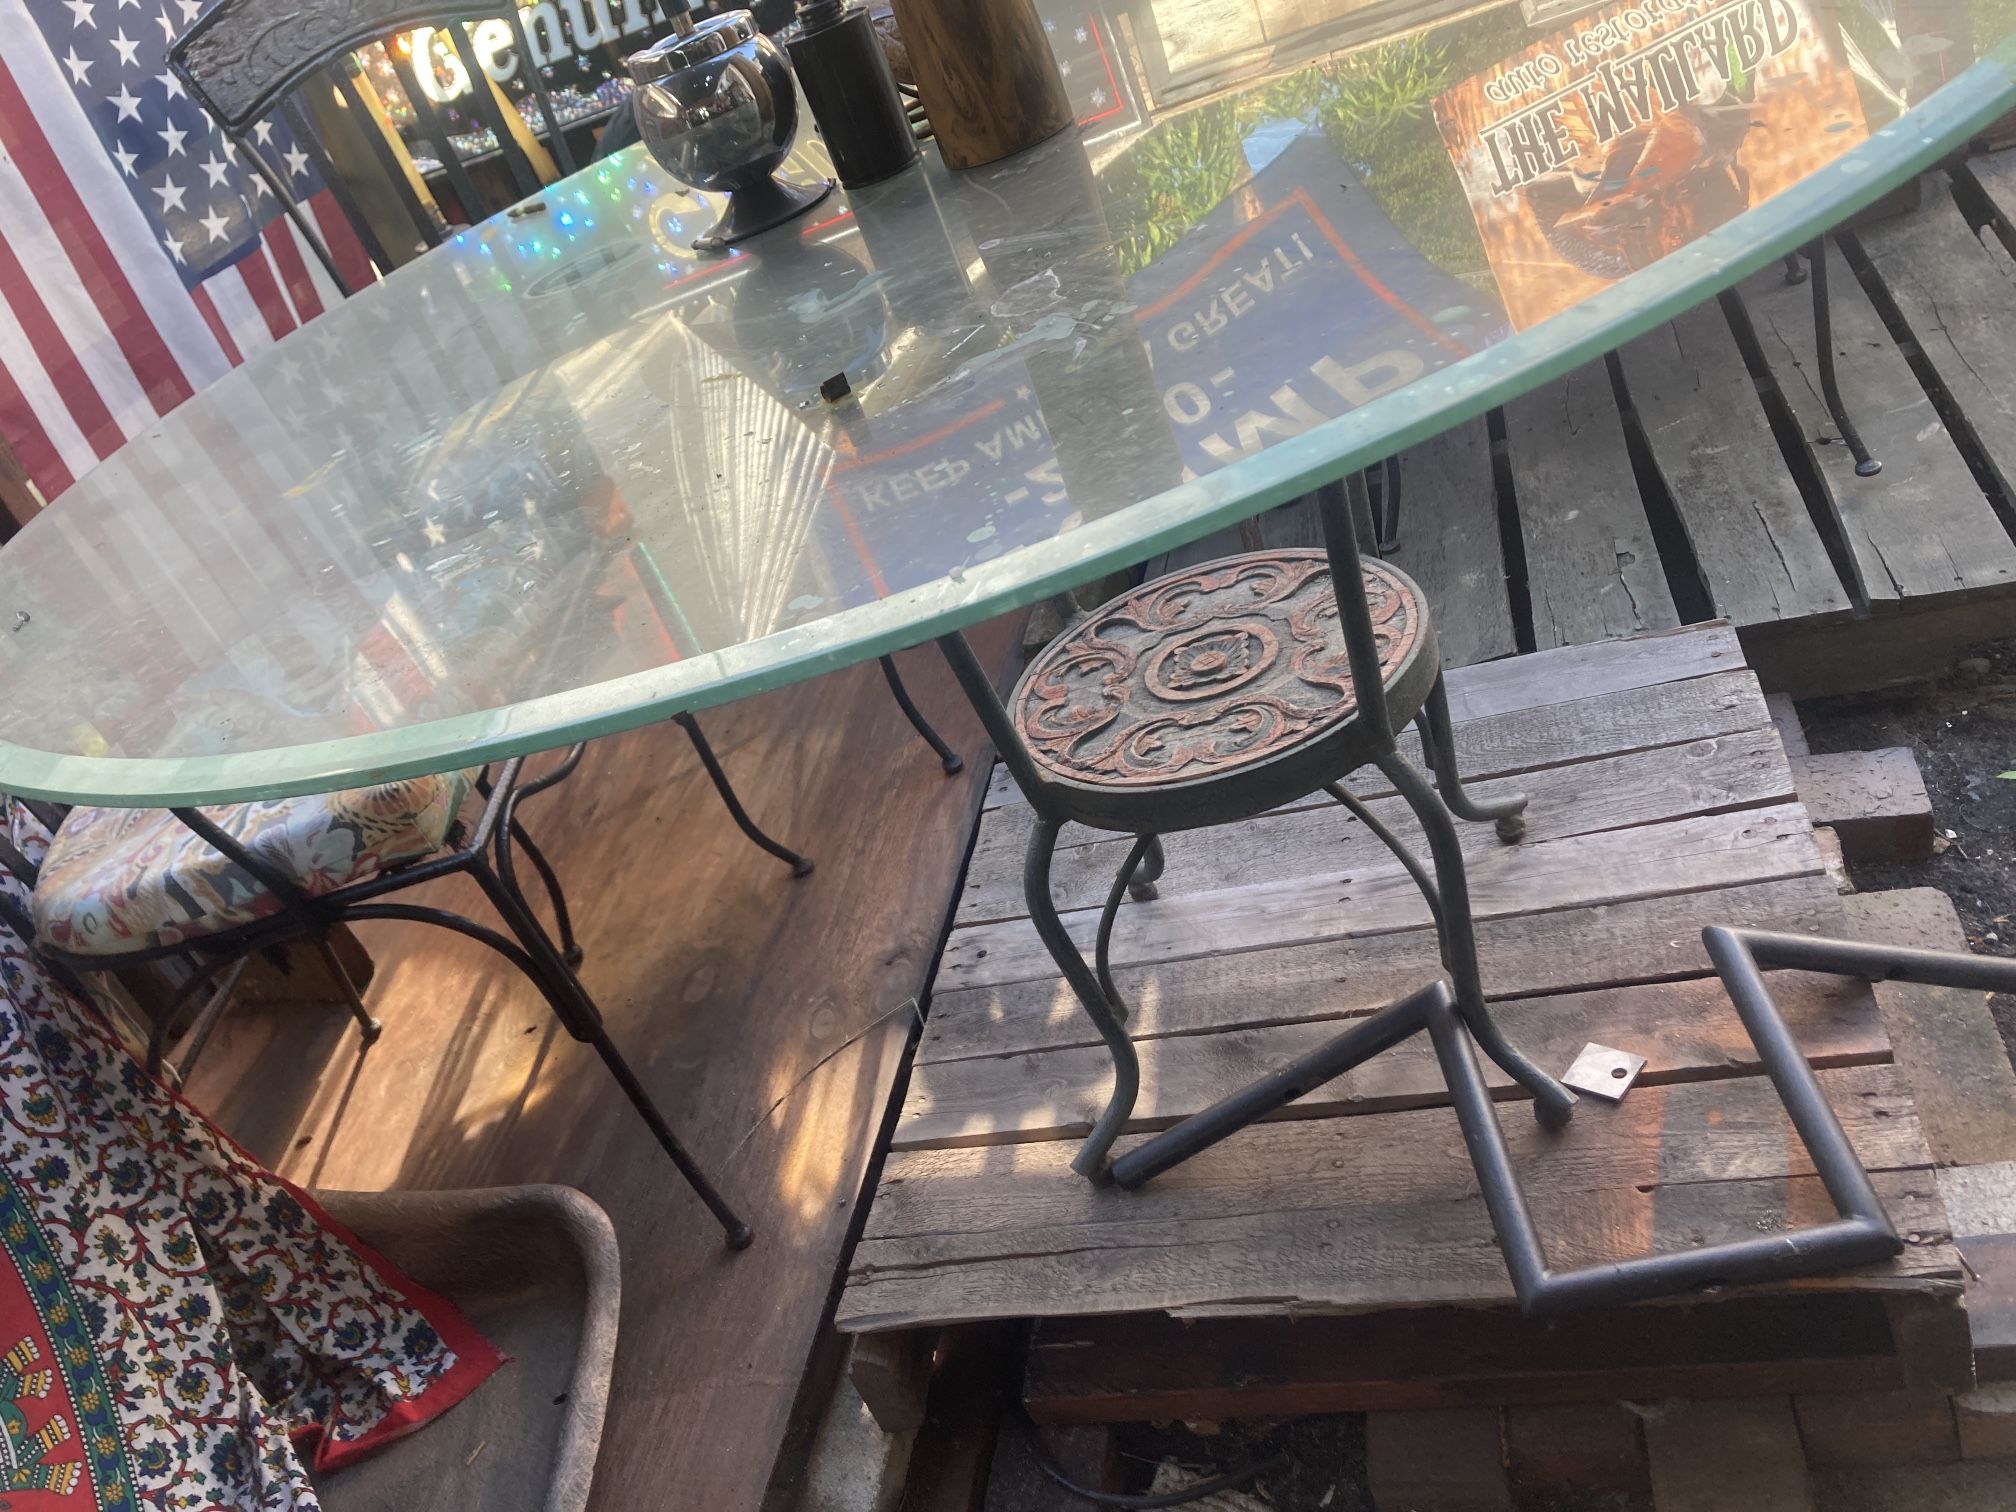 Glass Table And Chairs 